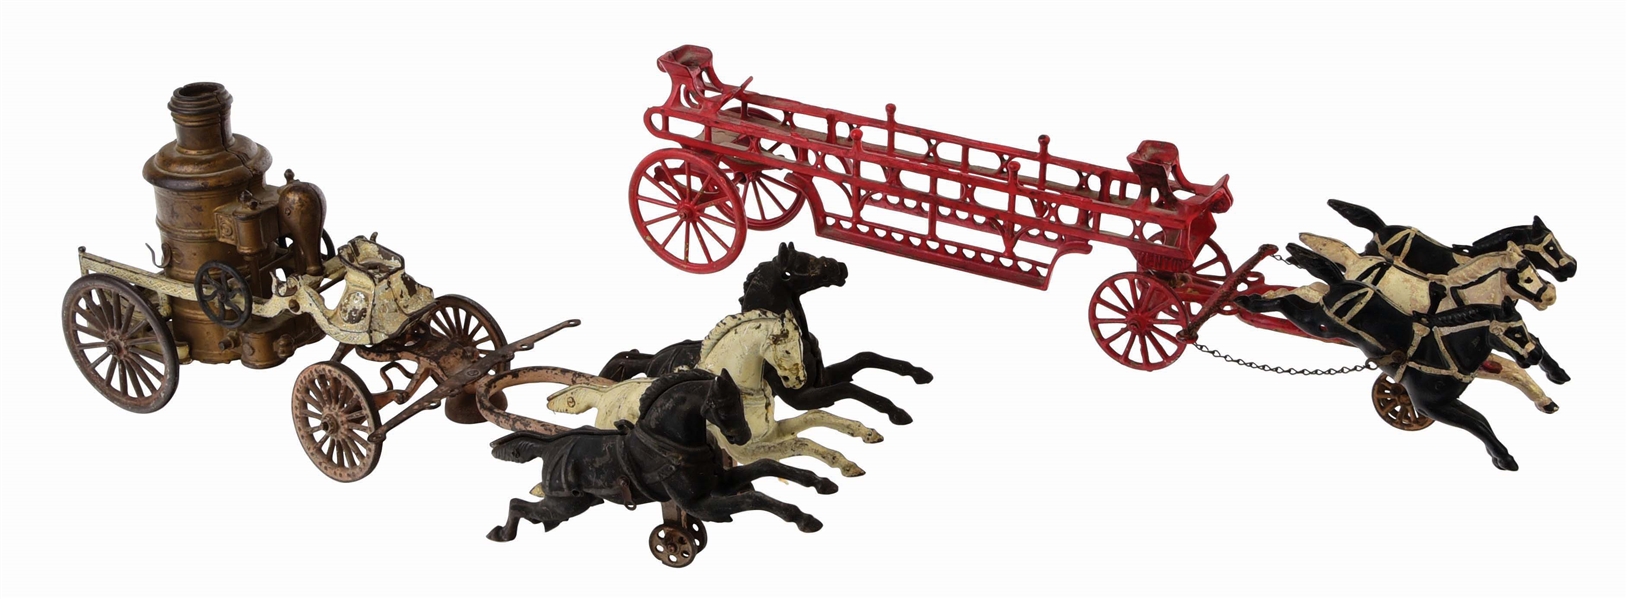 LOT OF 2: AMERICAN MADE HORSE-DRAWN FIRE PUMPER AND LADDER TOYS.